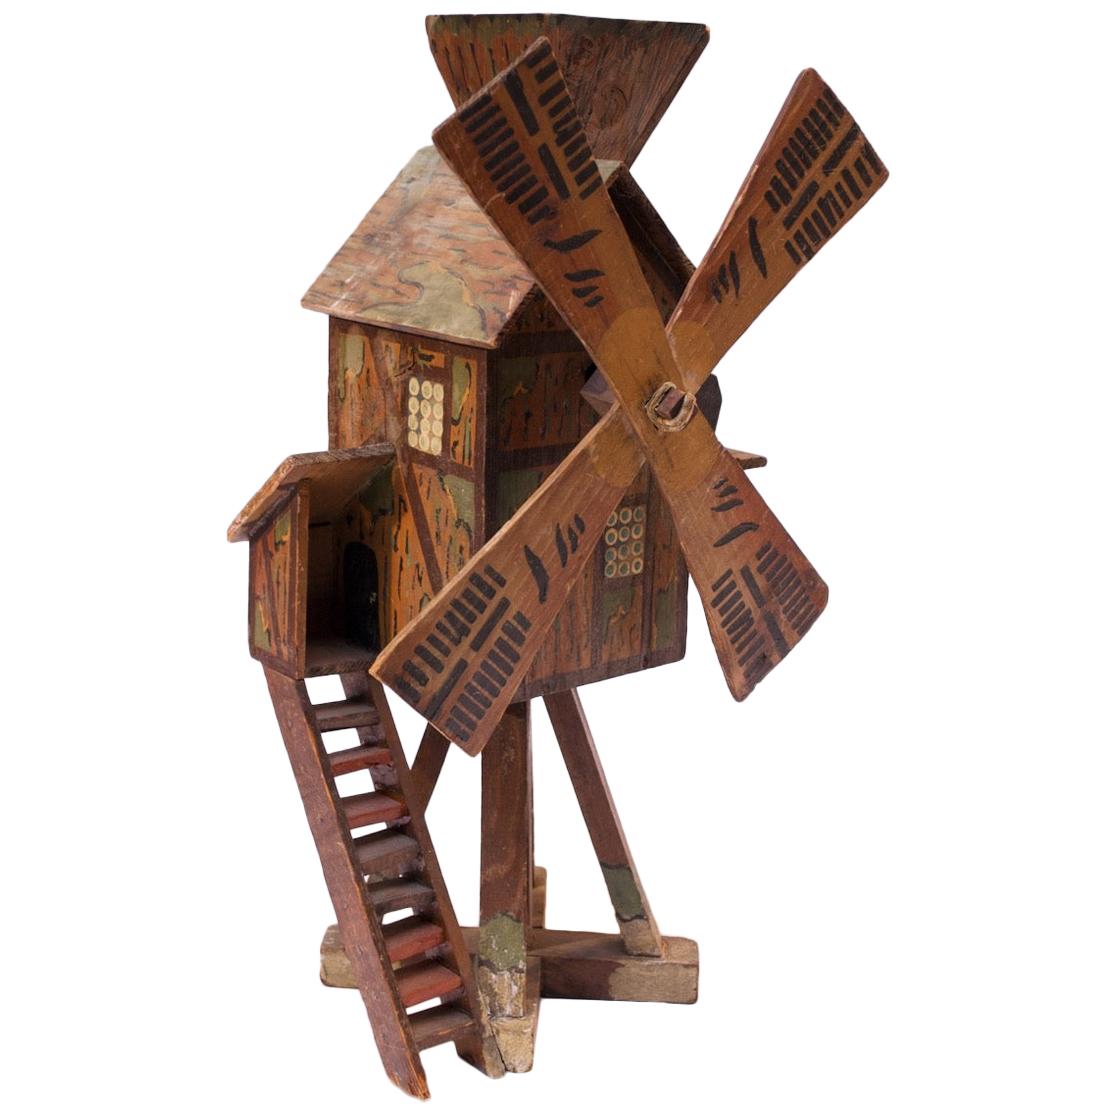 Early 20th Century Folk Art Hand Carved and Painted Barn Whirligig / Birdhouse